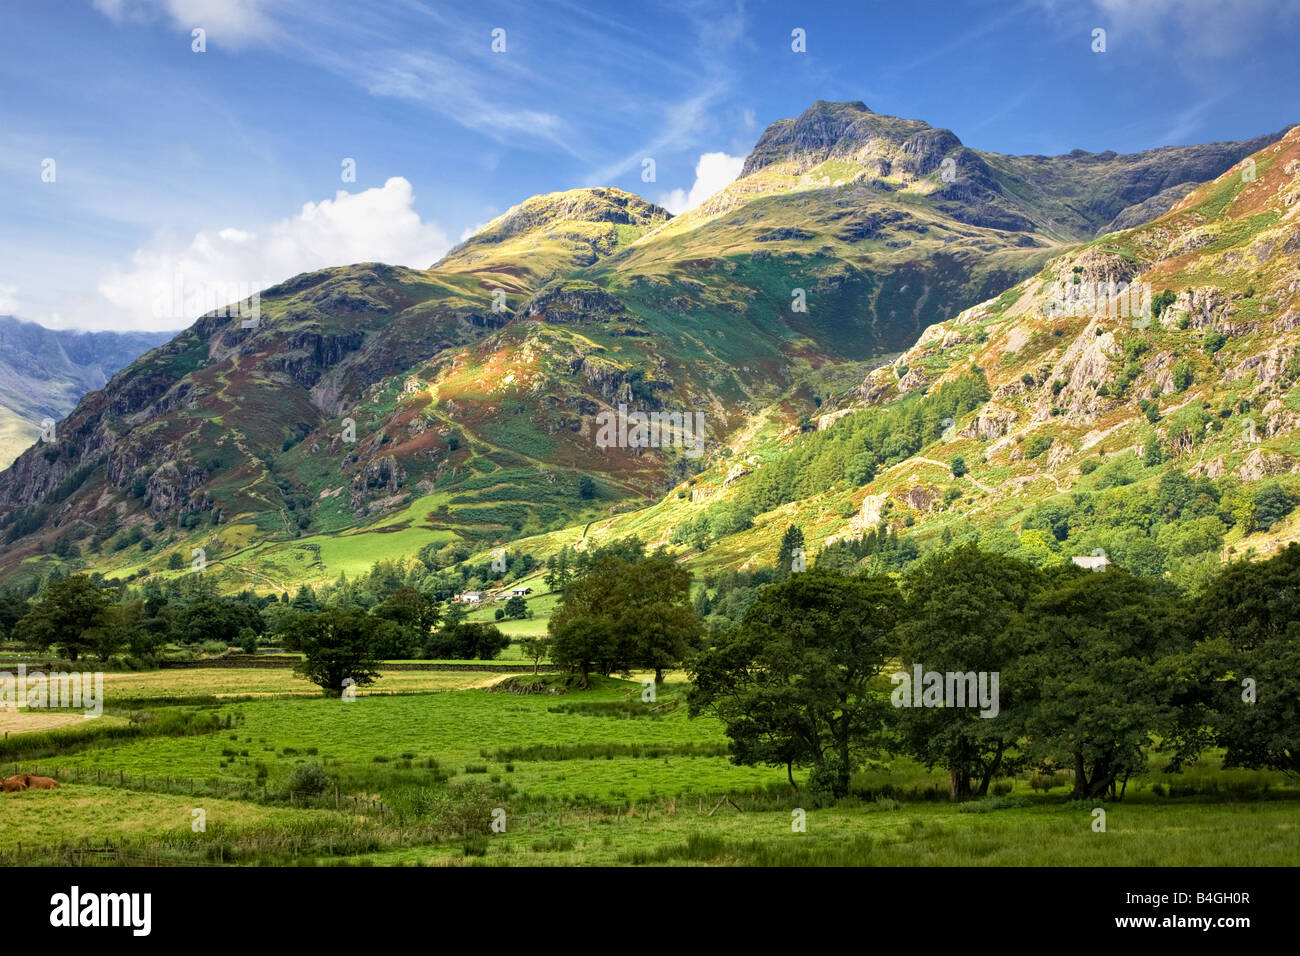 Langdale Pikes in The Langdale Valley, inglese Parco Nazionale del Distretto dei Laghi, Cumbria, England, Regno Unito Foto Stock